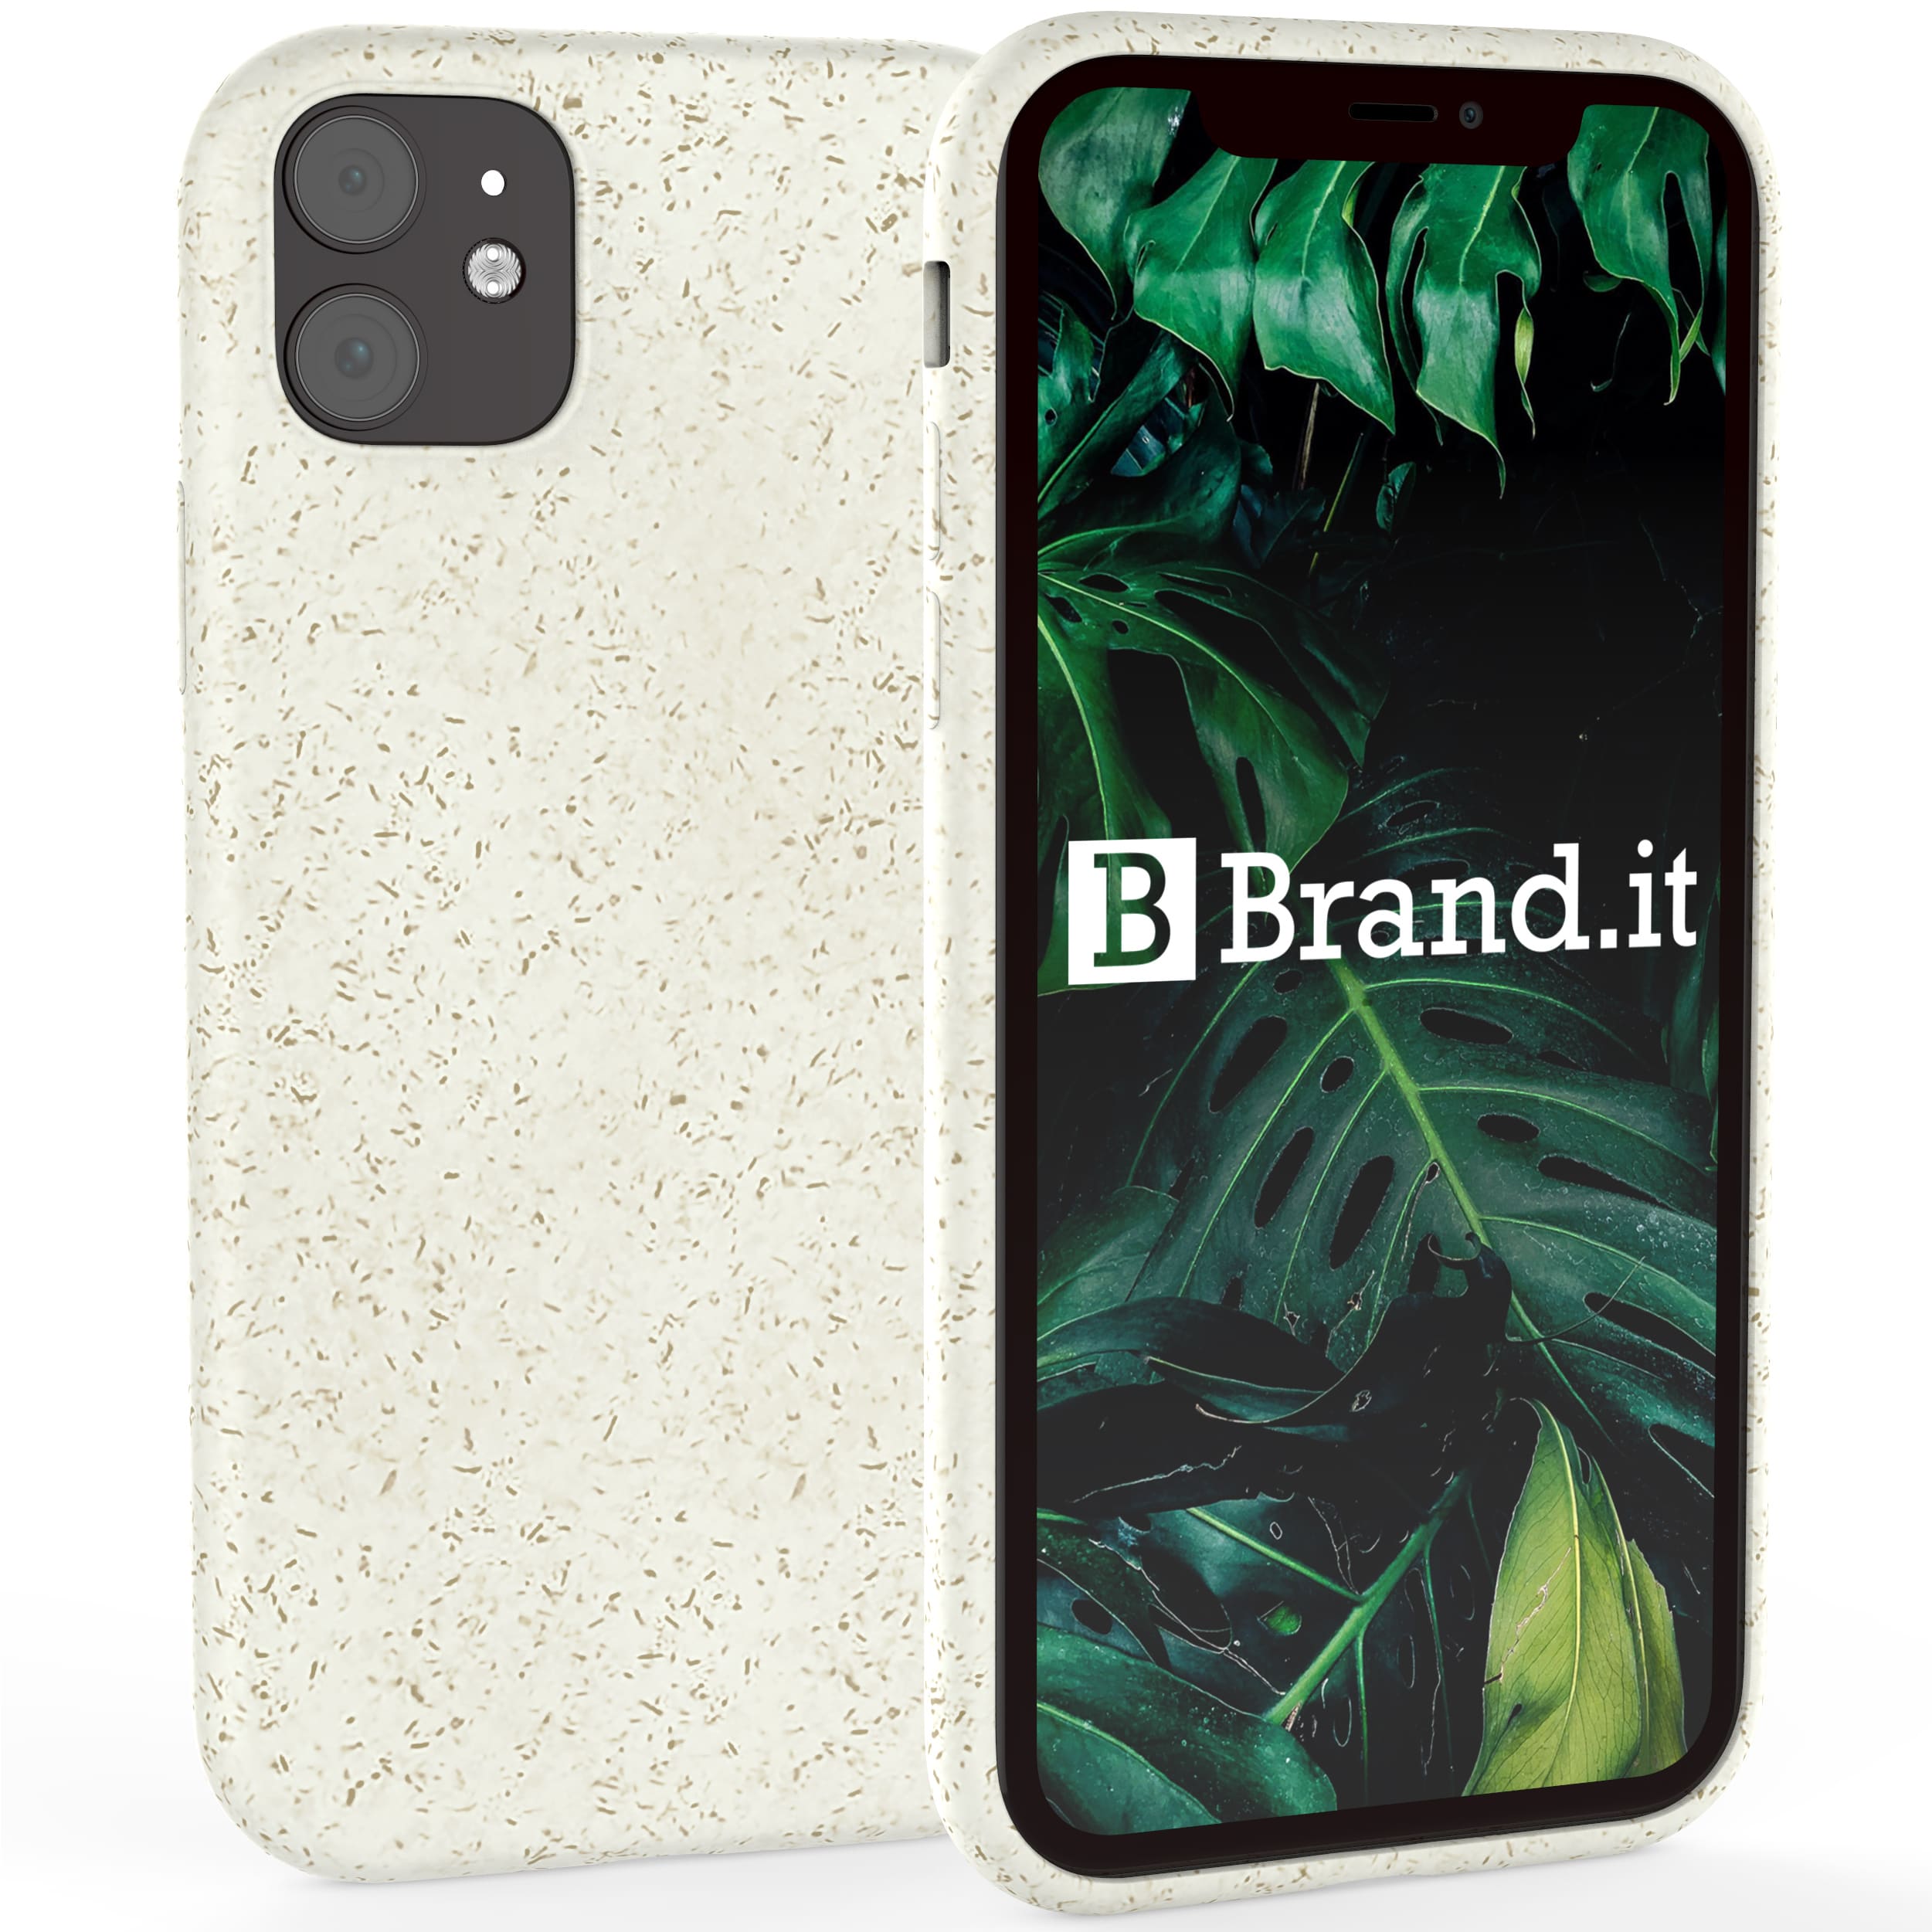 9 Brands Selling Eco-Friendly Phone Cases To Protect Your Phone